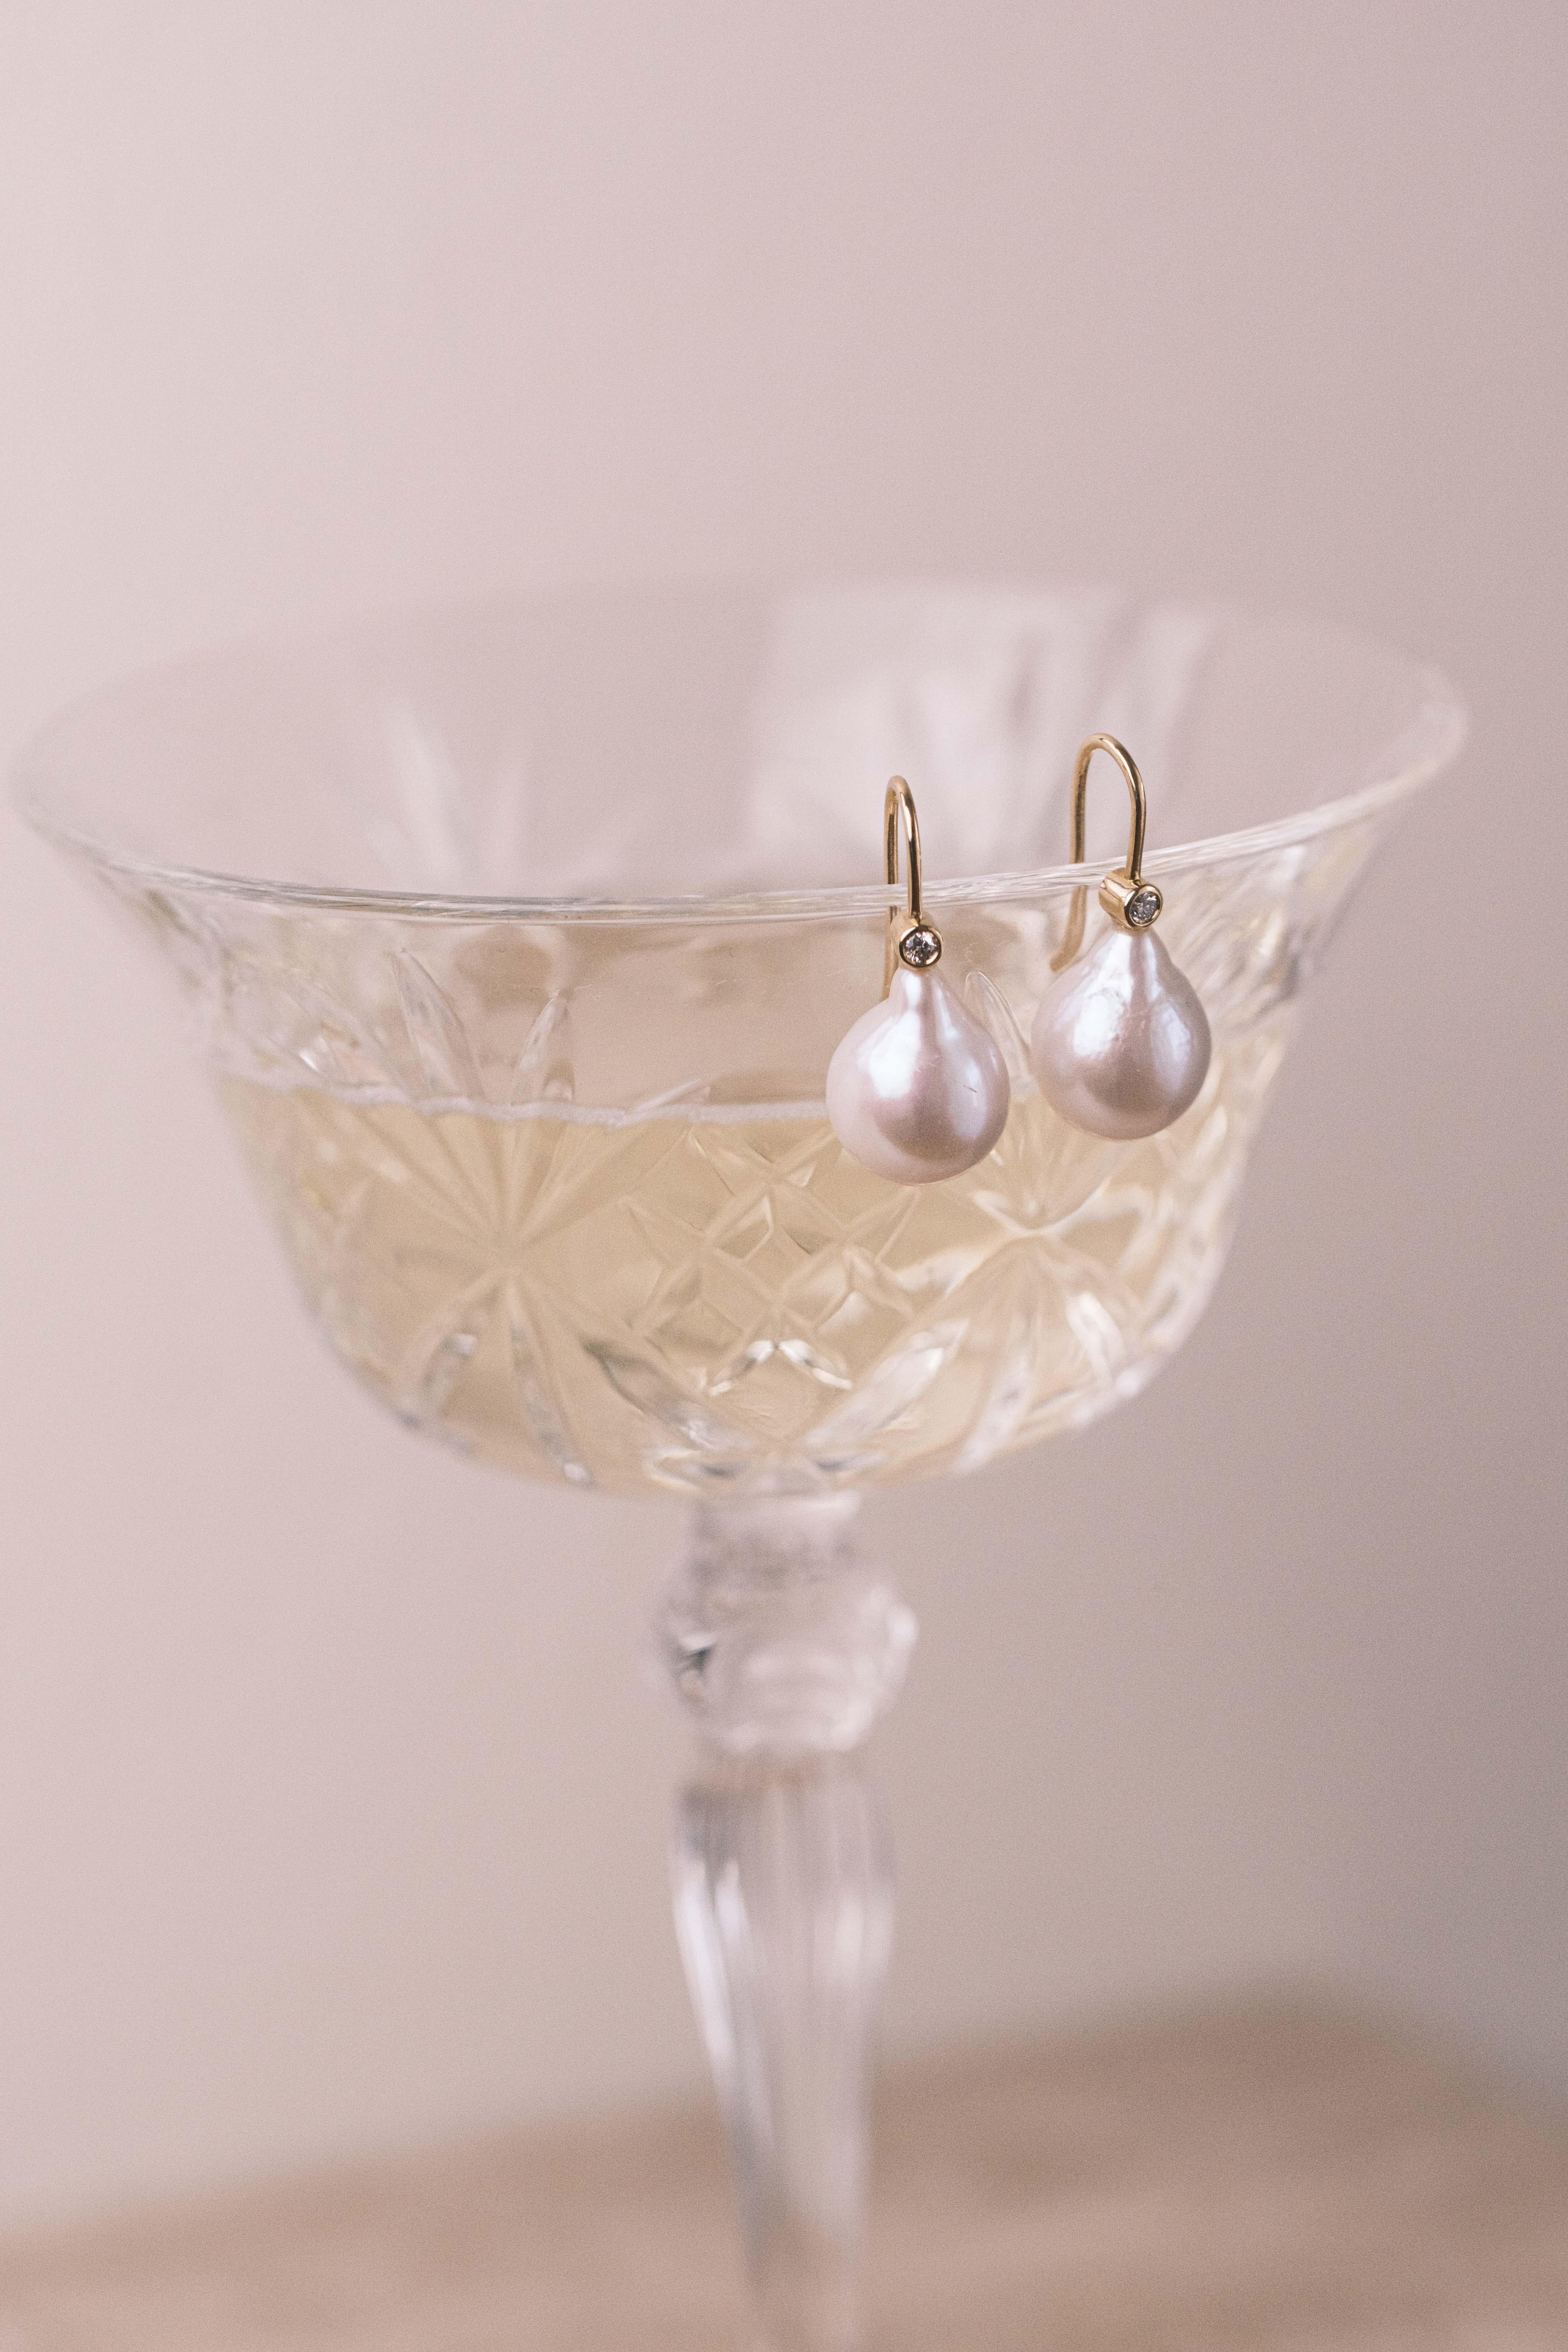 These stunning Michelle Massoura earrings feature baroque drop shaped pearls and glimmering bezel set natural diamonds. Their slim hook design ensures they are easy to slip on and comfortable to wear. Due to the organic nature of the pearls every